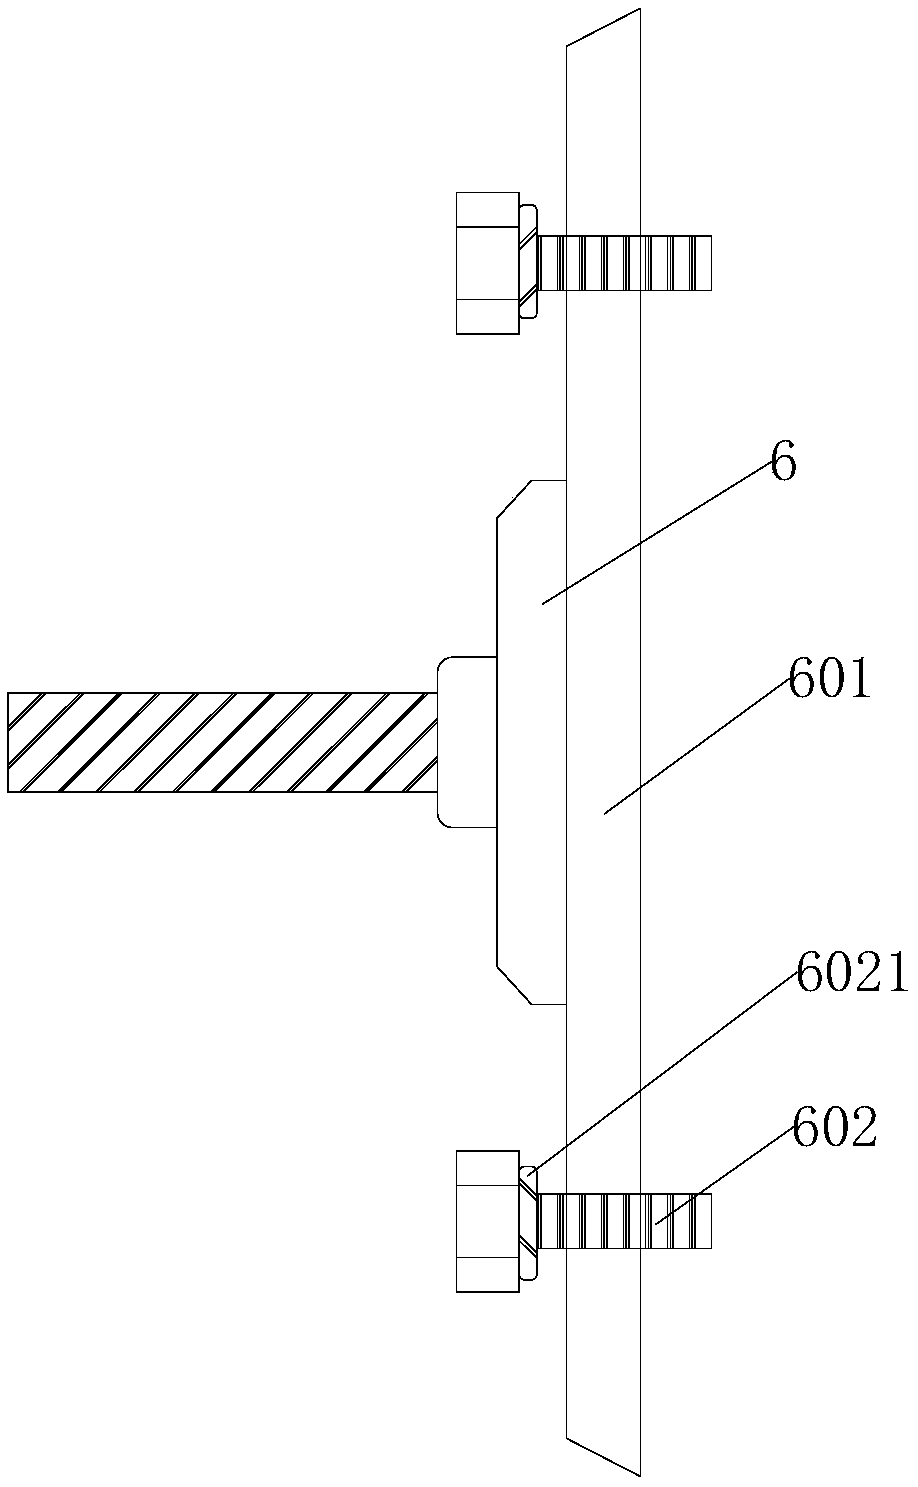 Support structure of computer screen